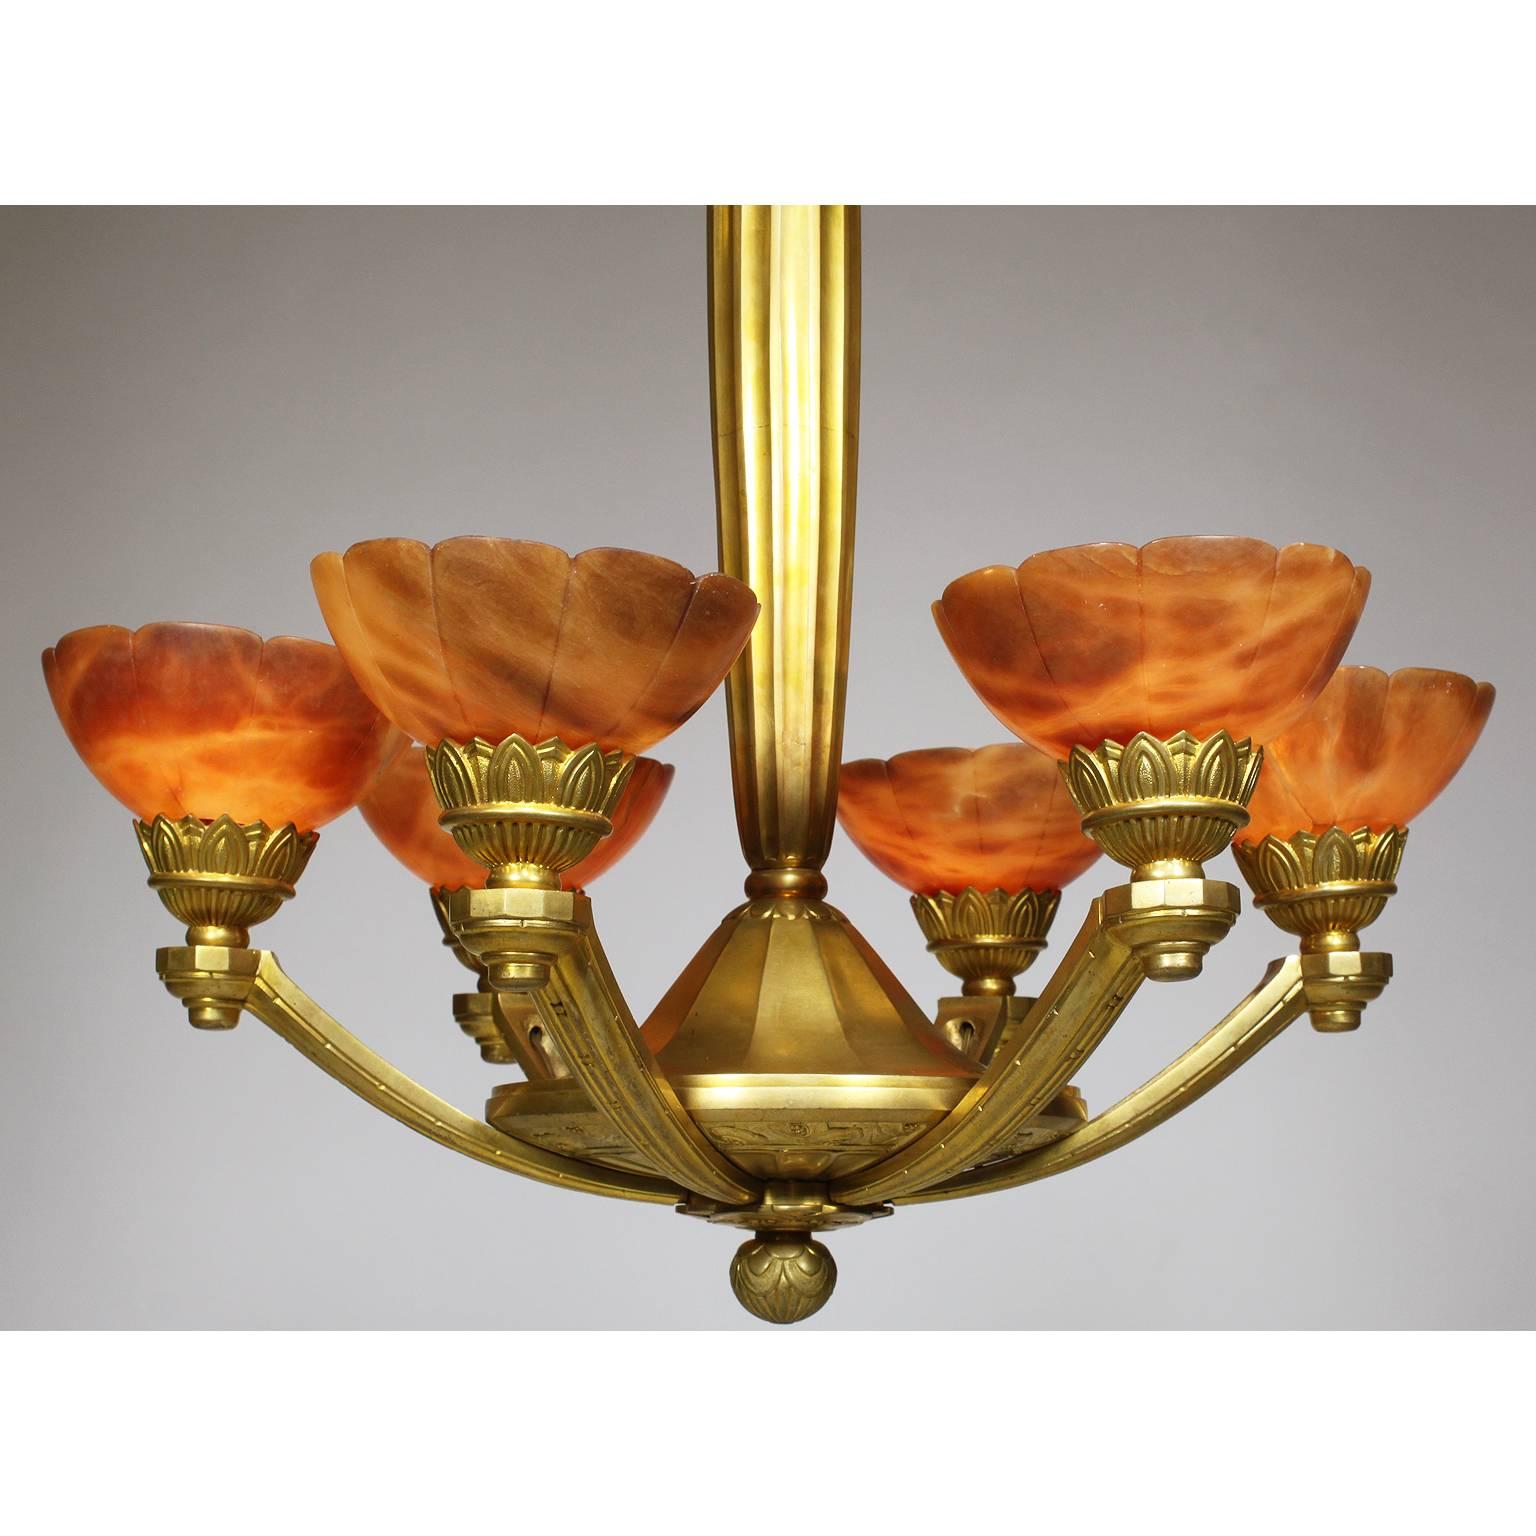 A fine and rare French Art-Deco gilt bronze and amber alabaster six-light chandelier, Paris, circa 1920.

Measures: Height: 37 1/4 inches (94.6 cm)
Width: 24 inches (60.1 cm)

Ref.: A1803 - Lot 10718.